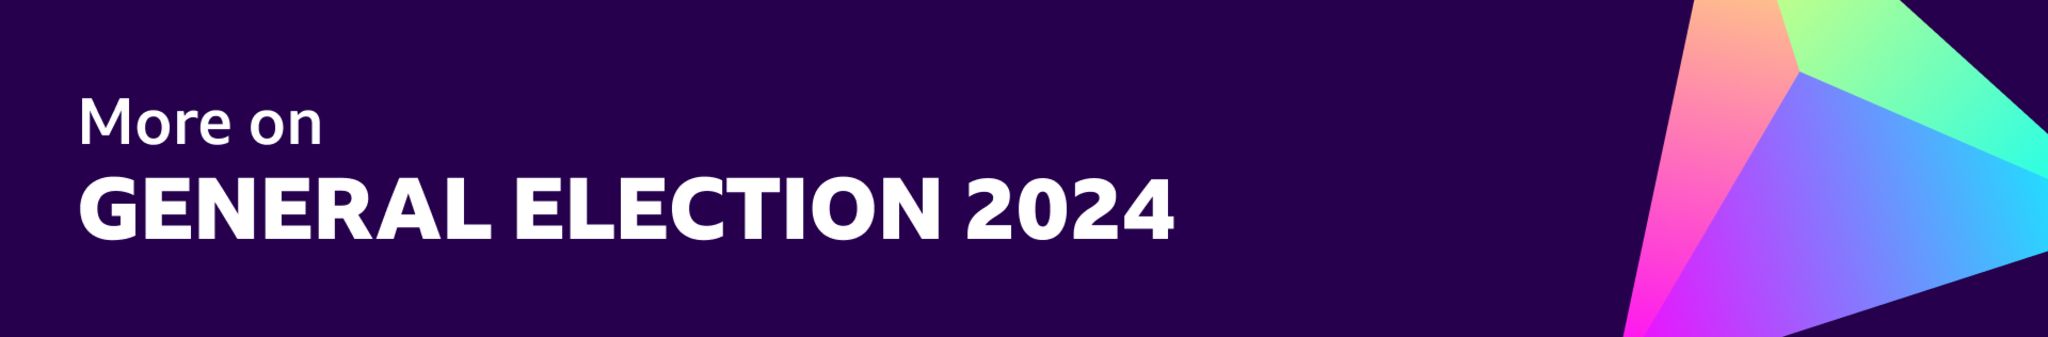 More on General Election 2024 purple banner